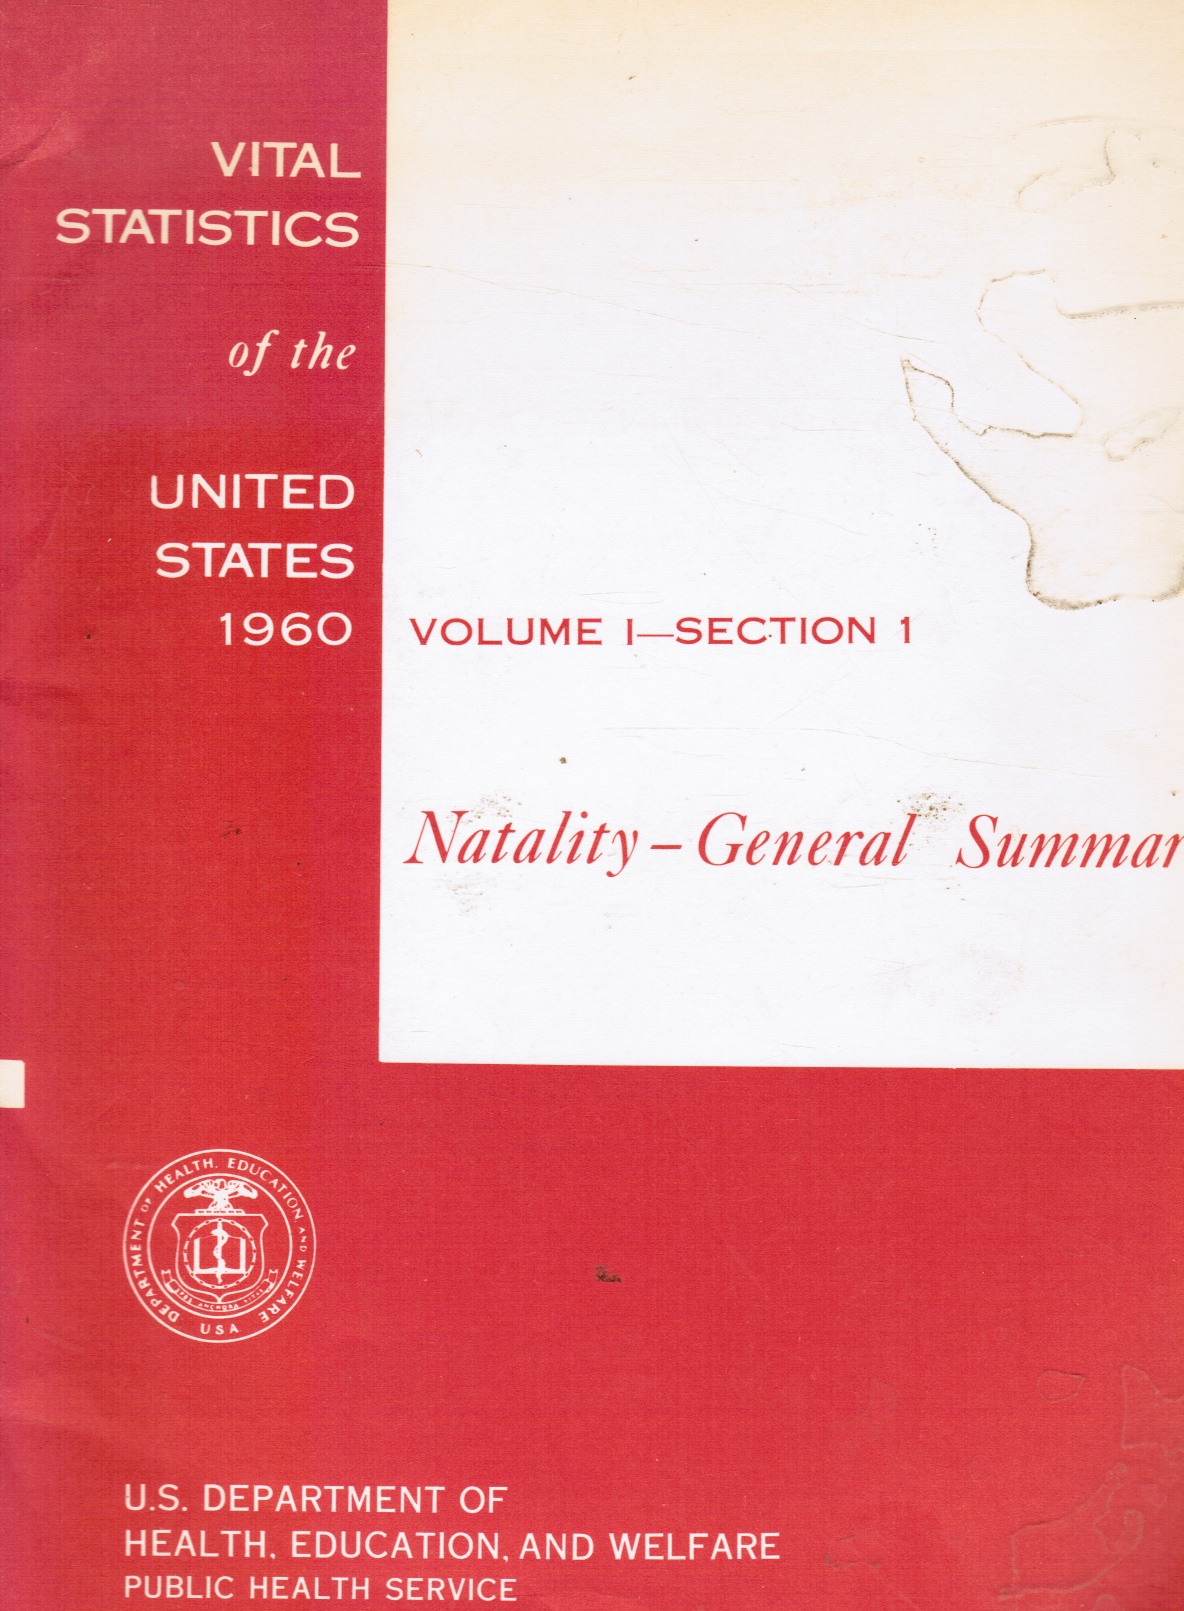 FORREST E. LINDER, PH. D, DIRECTOR - Vital Statistics of the United States, 1960: Natality-General Summary